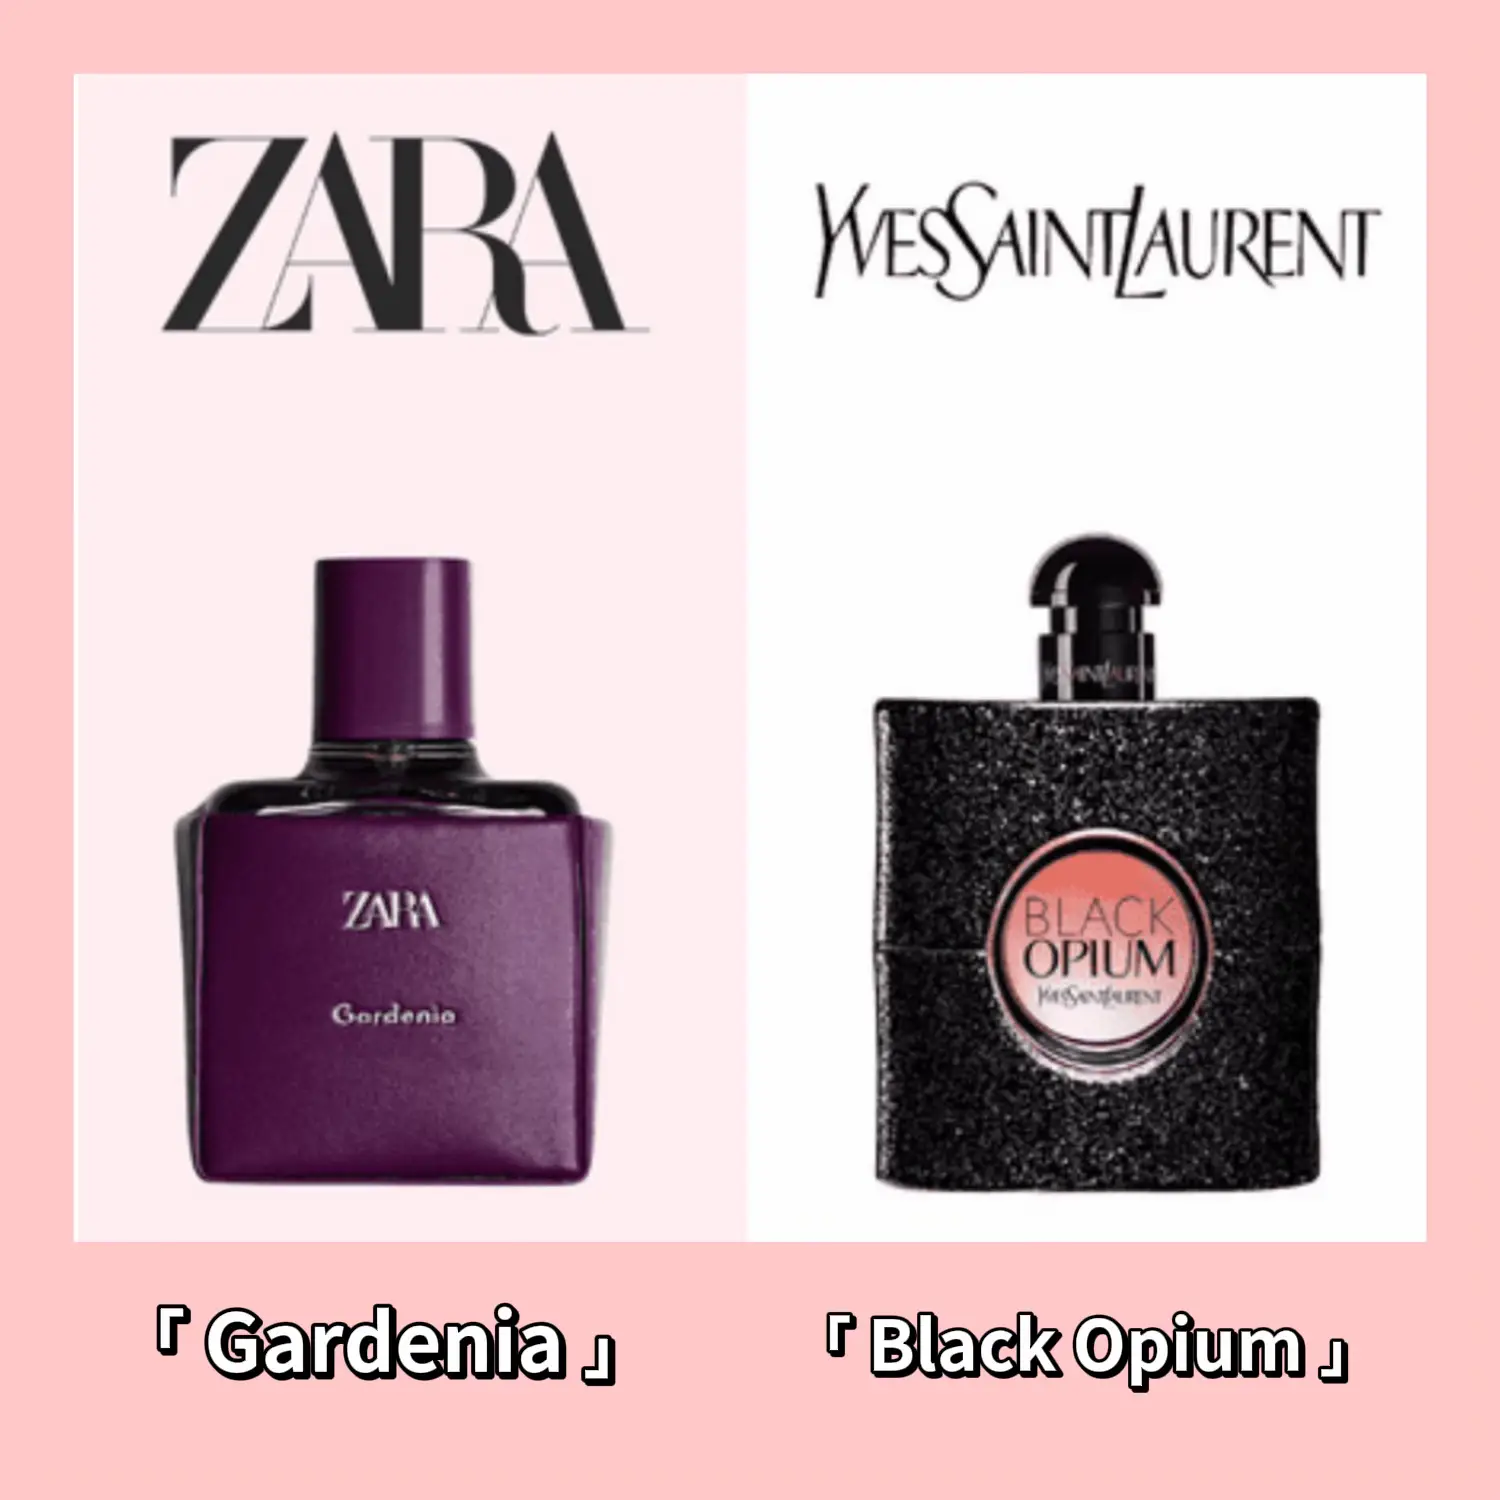 8 ZARA Perfume Dupes that Smell *Just* Like Designer Scents